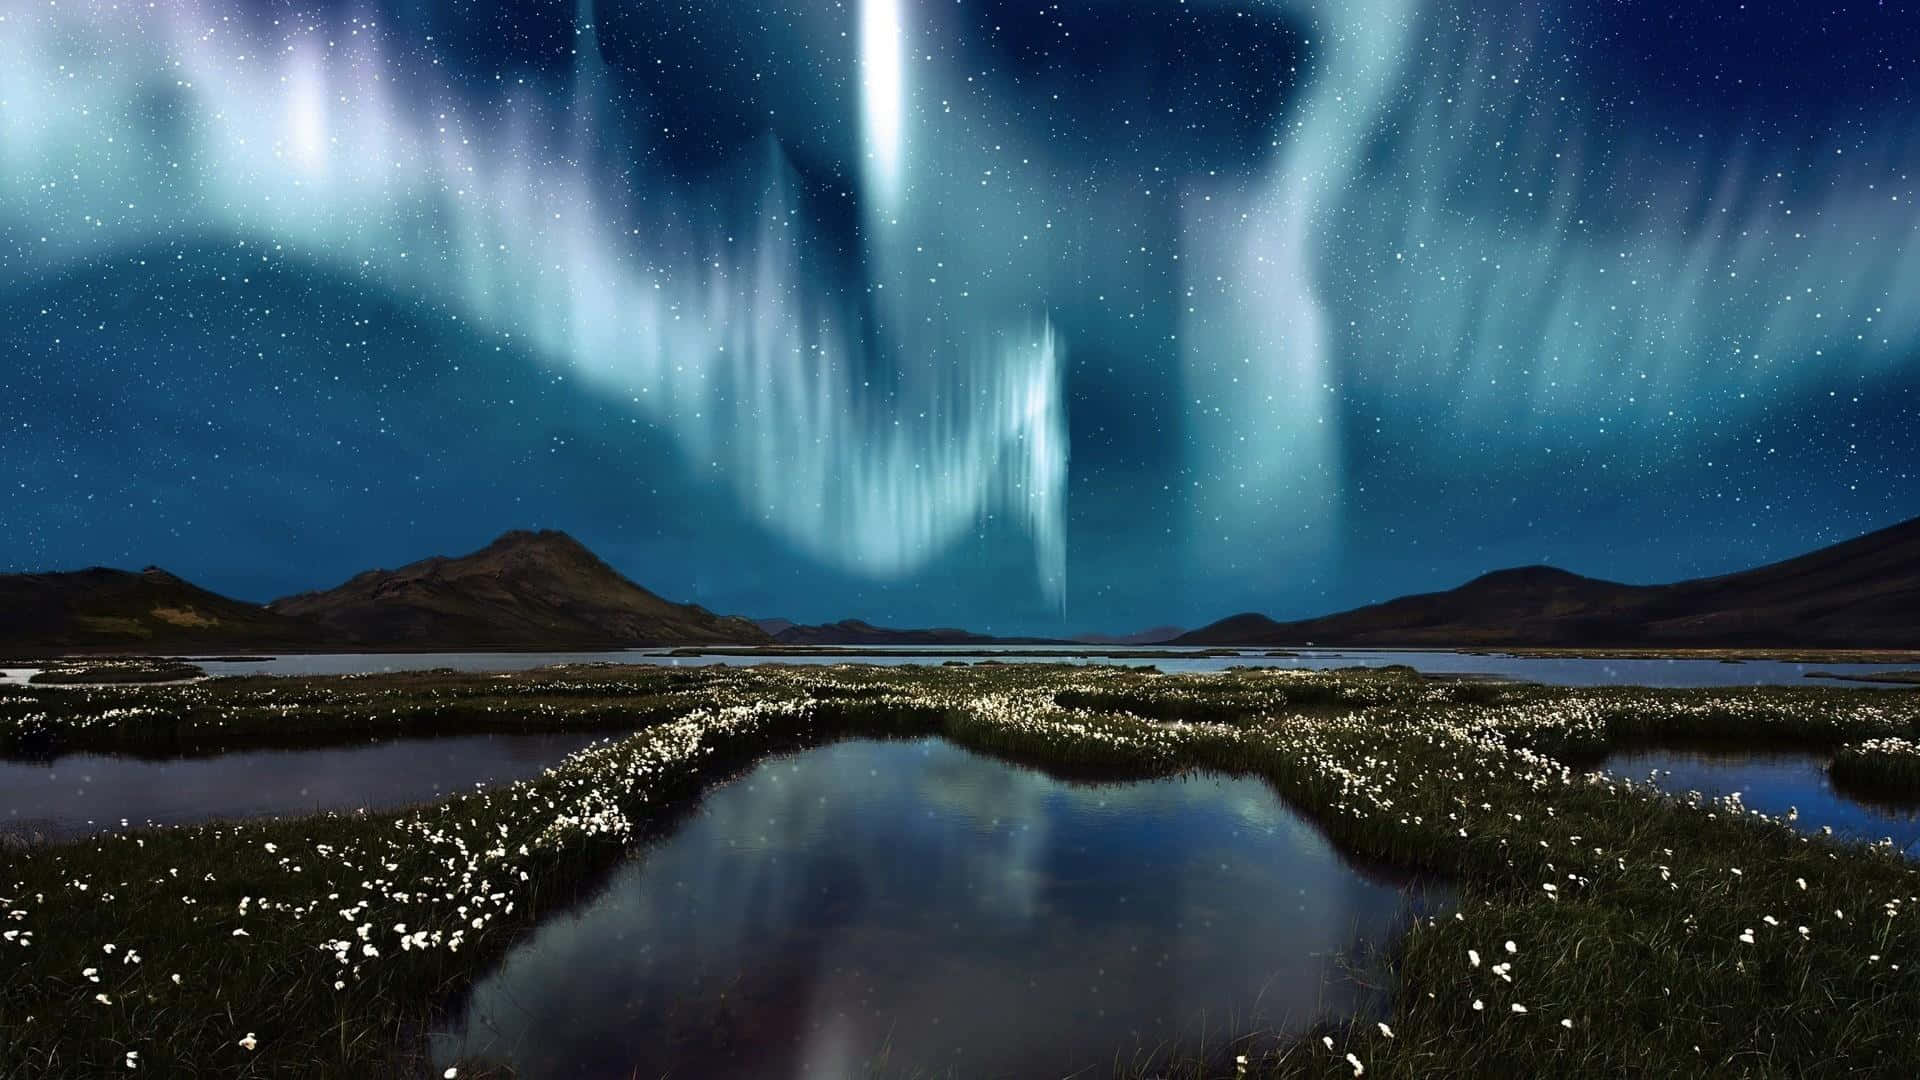 "Take In The Beauty Of The Aurora"